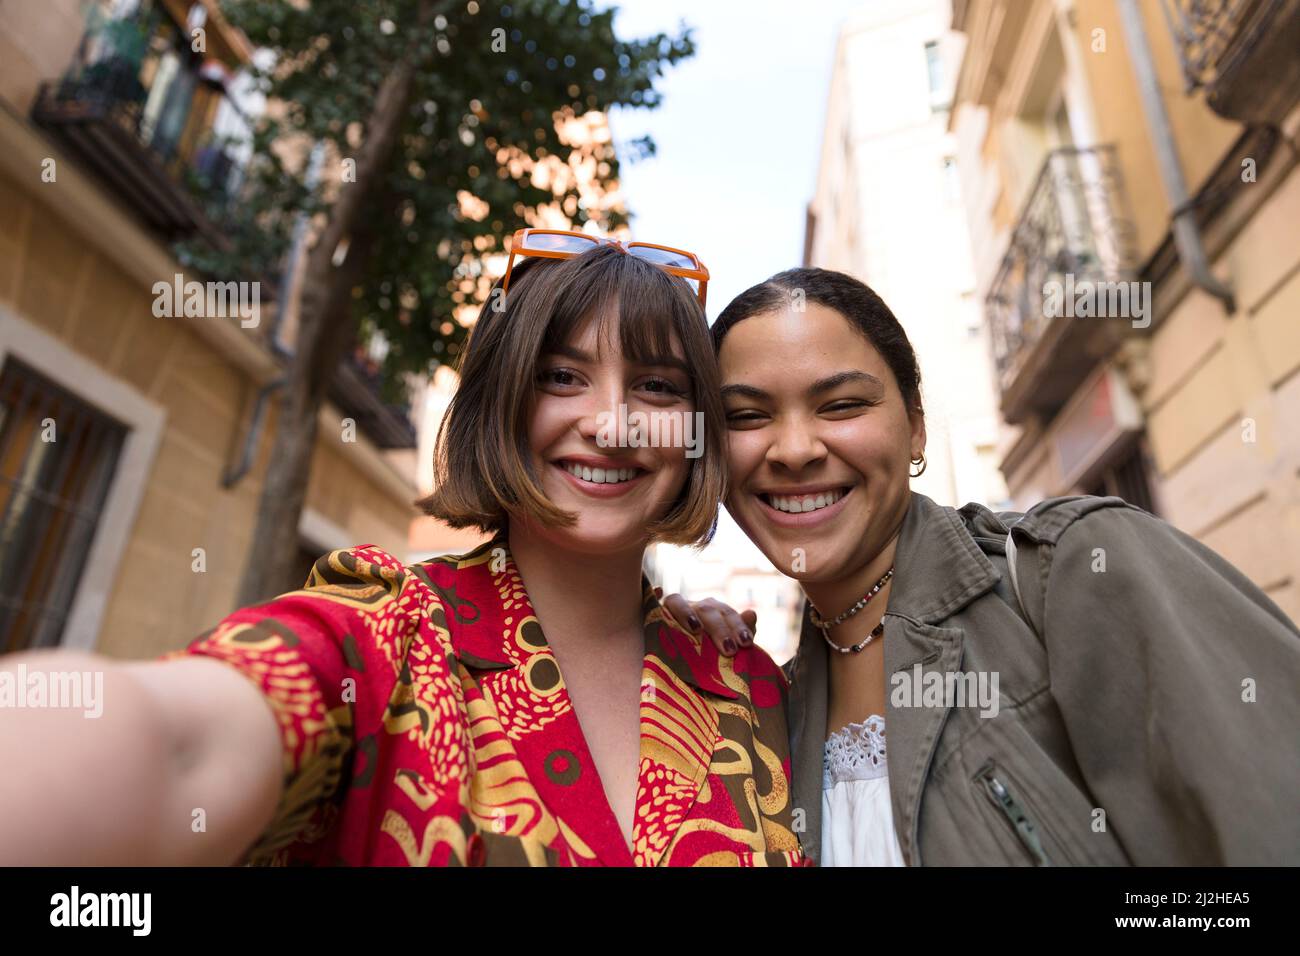 Two smiling girls taking a photo together with mobile phone outdoors. Happy multiethnic people. Stock Photo